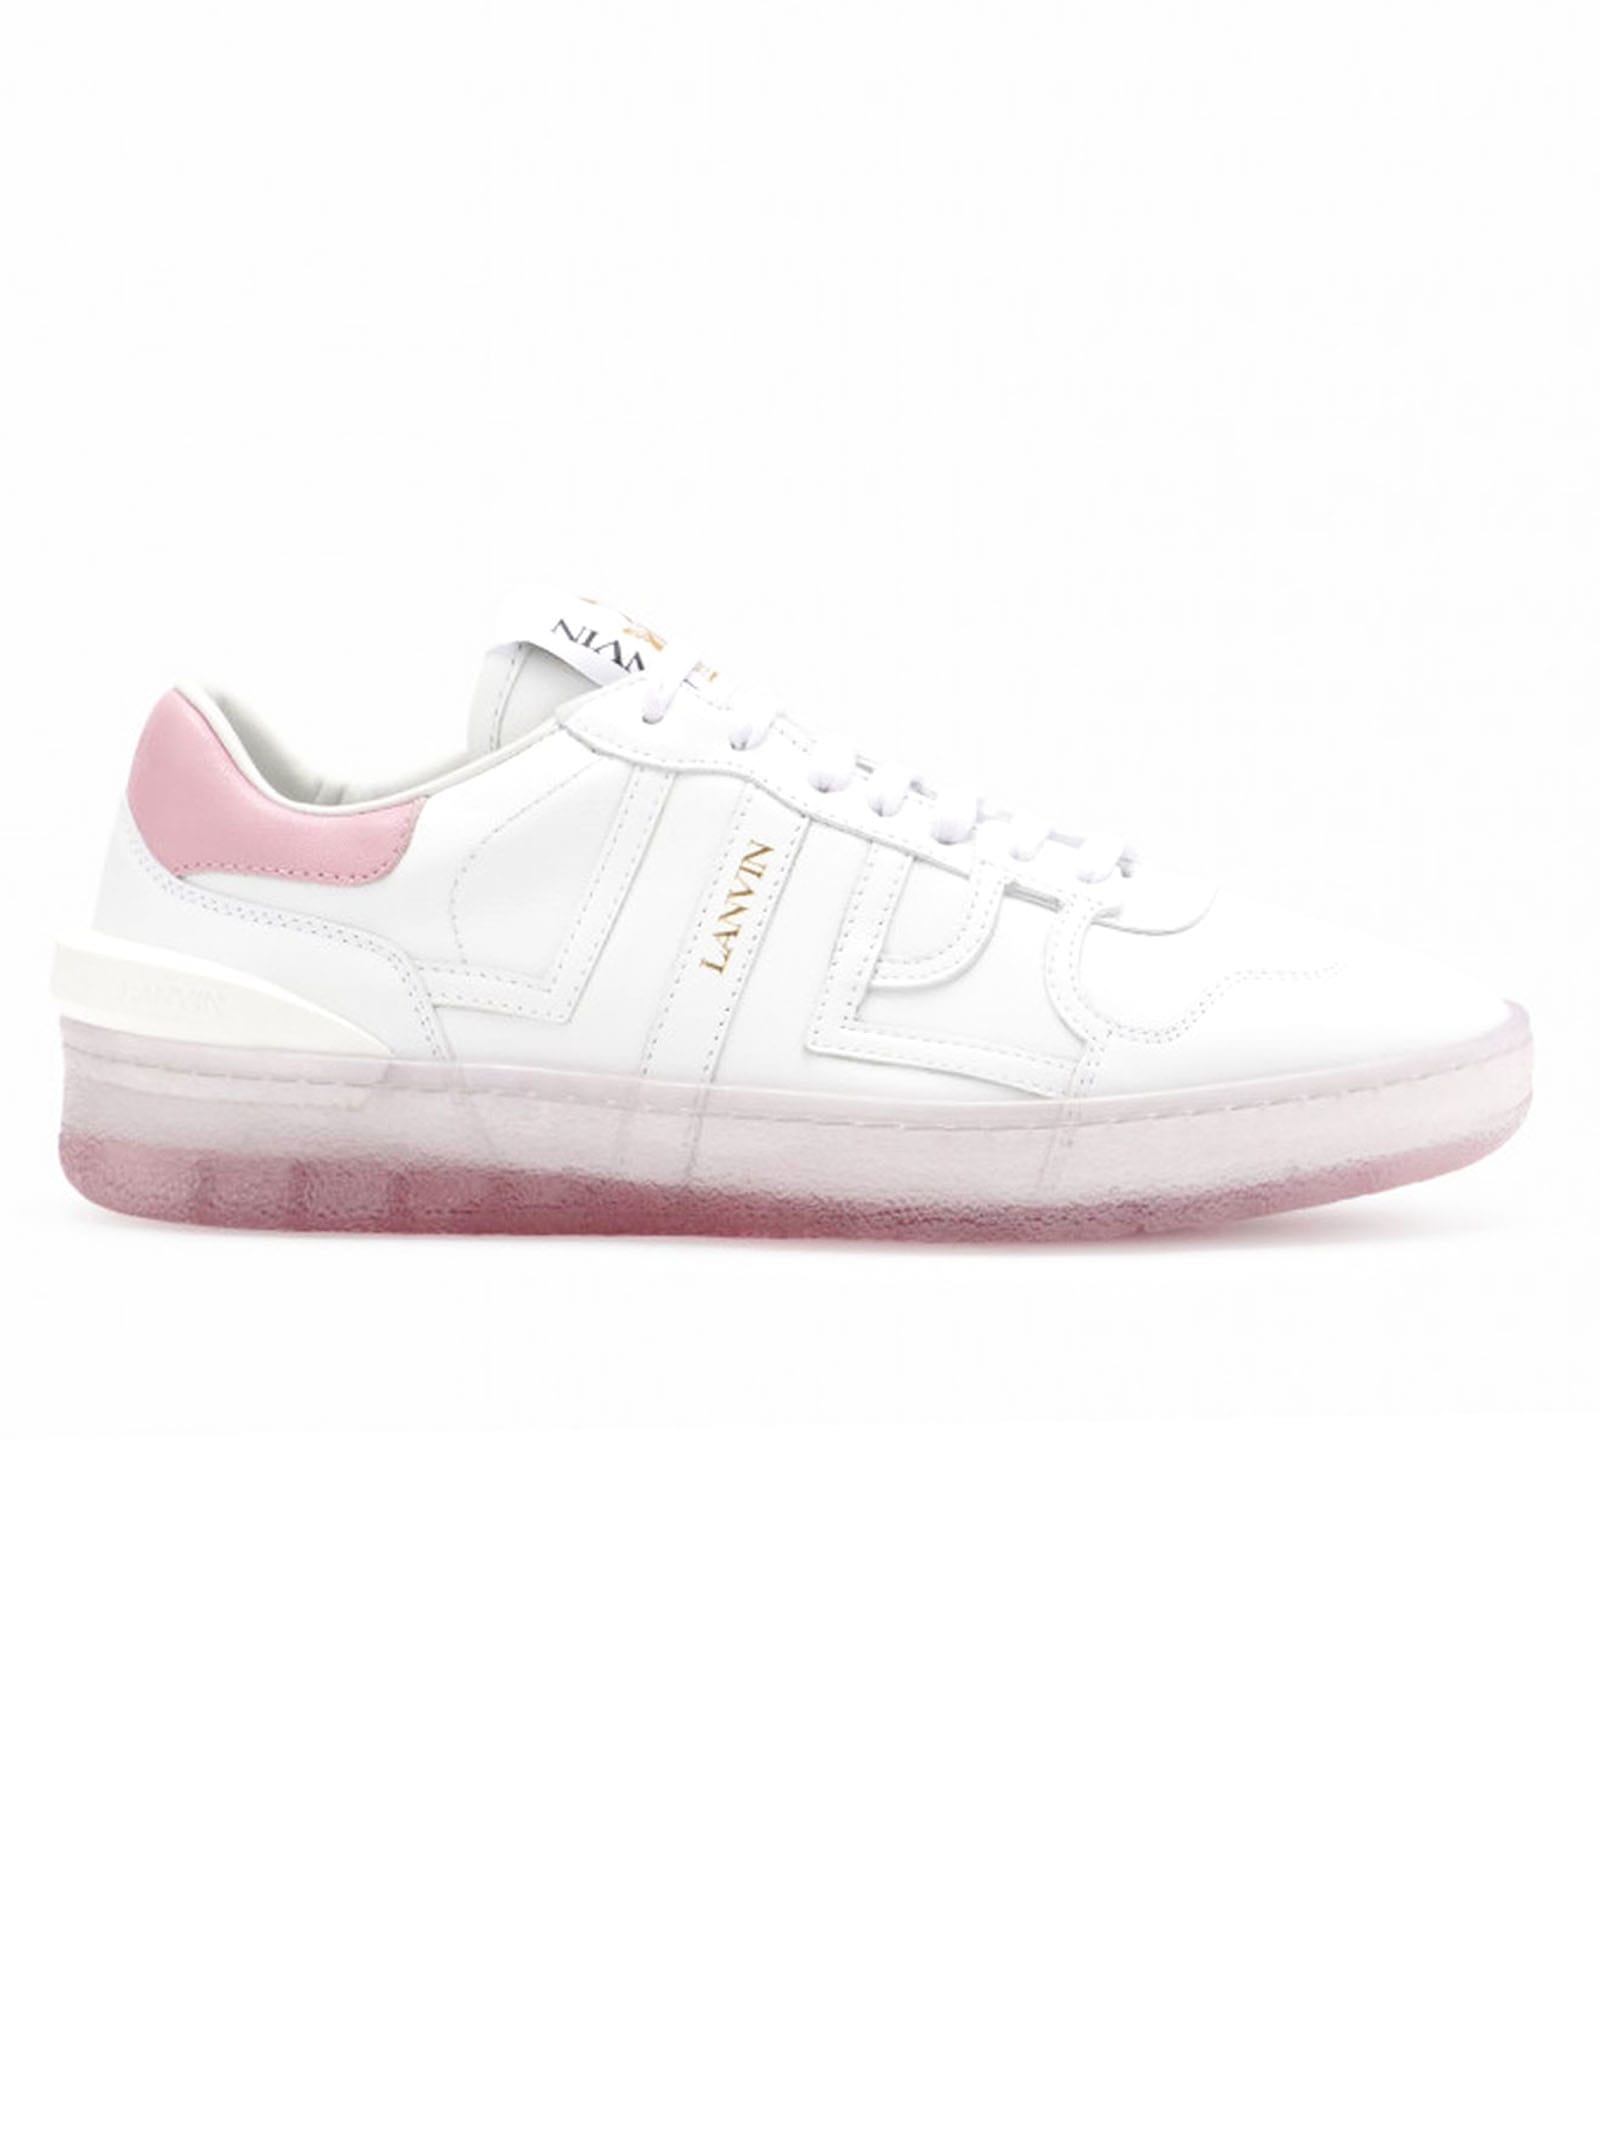 Lanvin White Leather Clay Sneakers